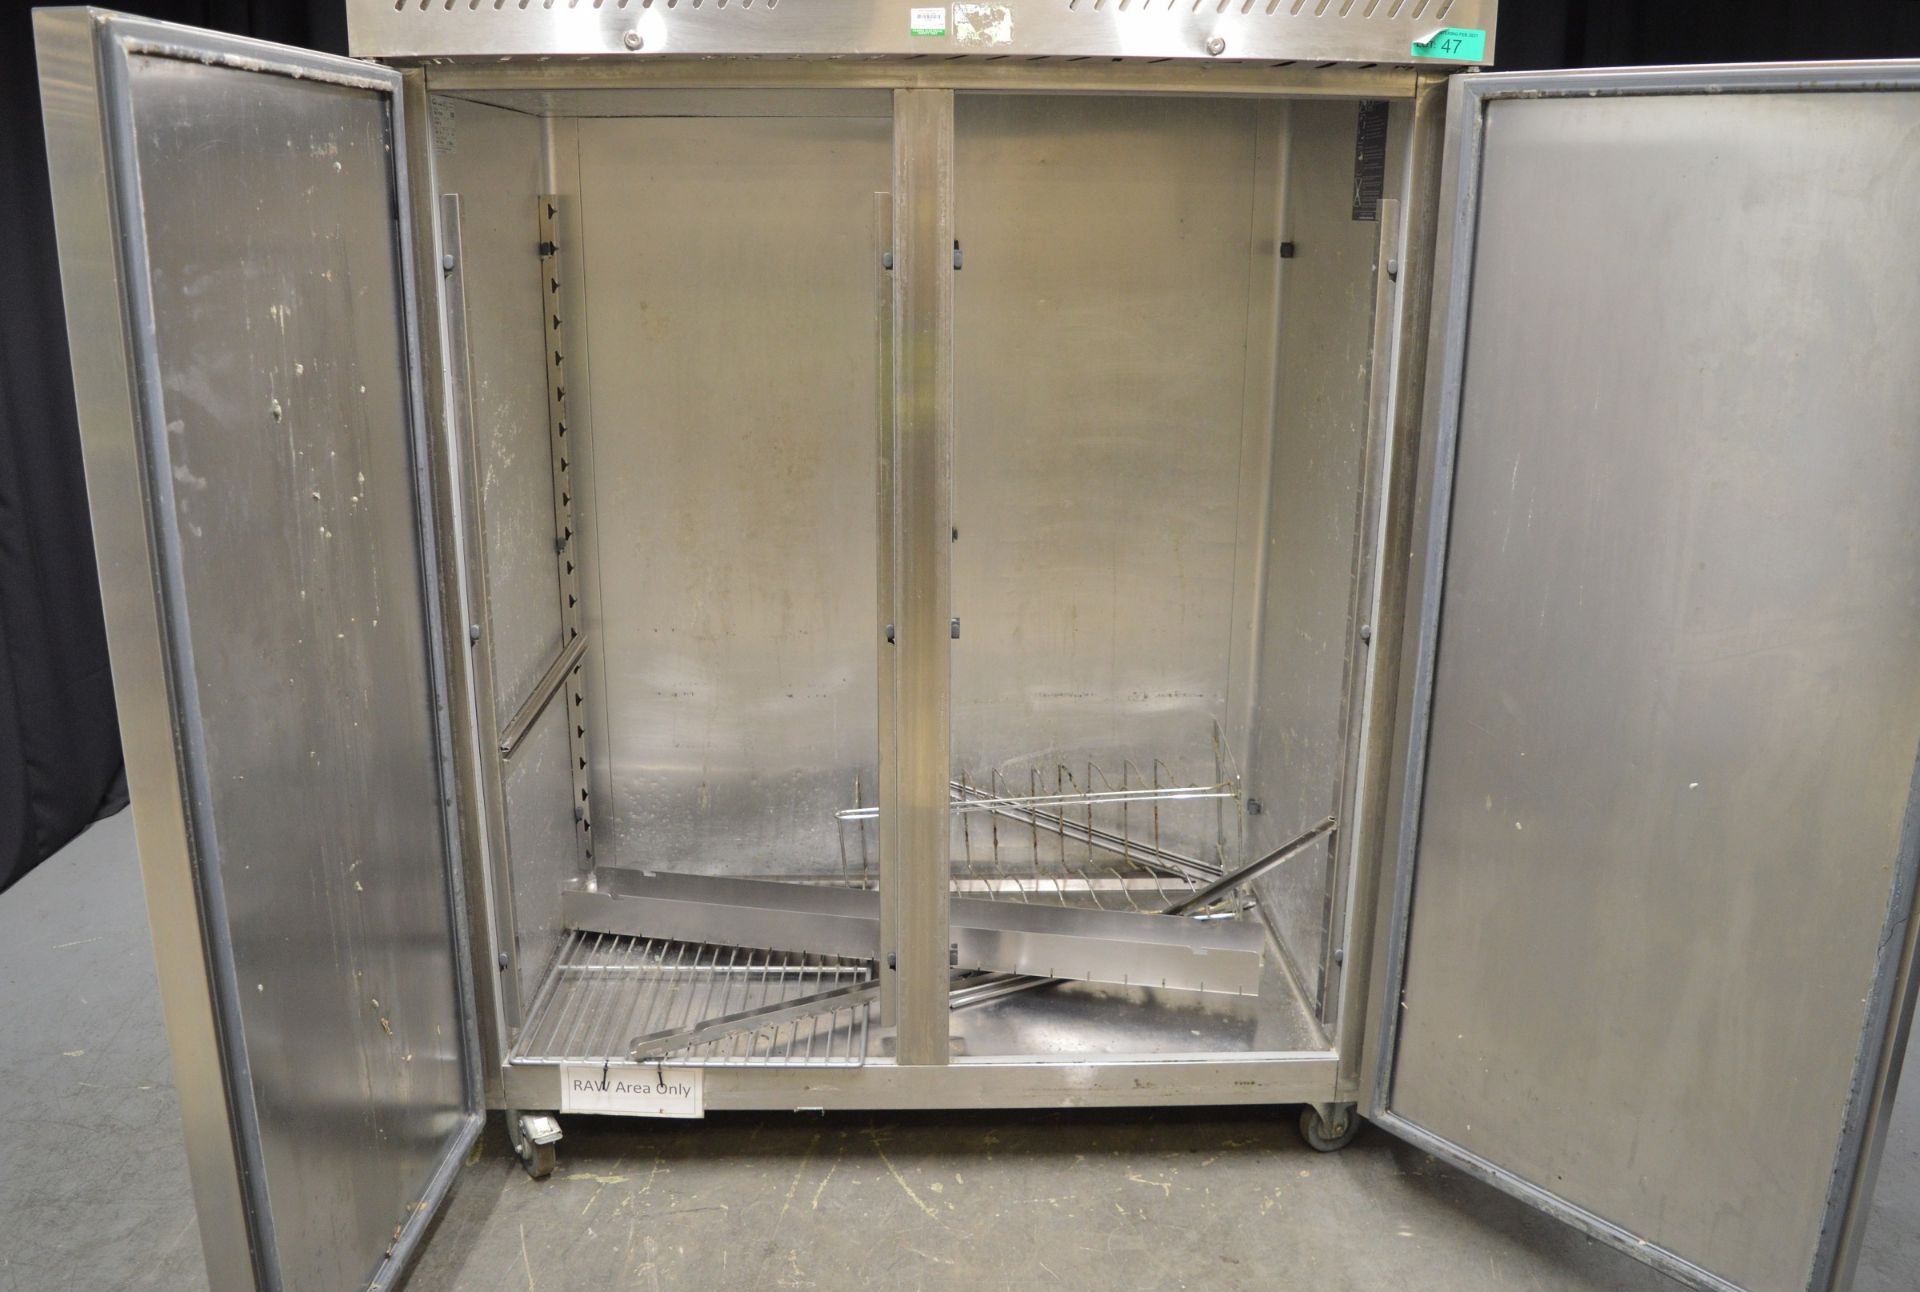 Williams HJ2SA Double Door Refrigerator (damage to top of unit) - Image 2 of 7